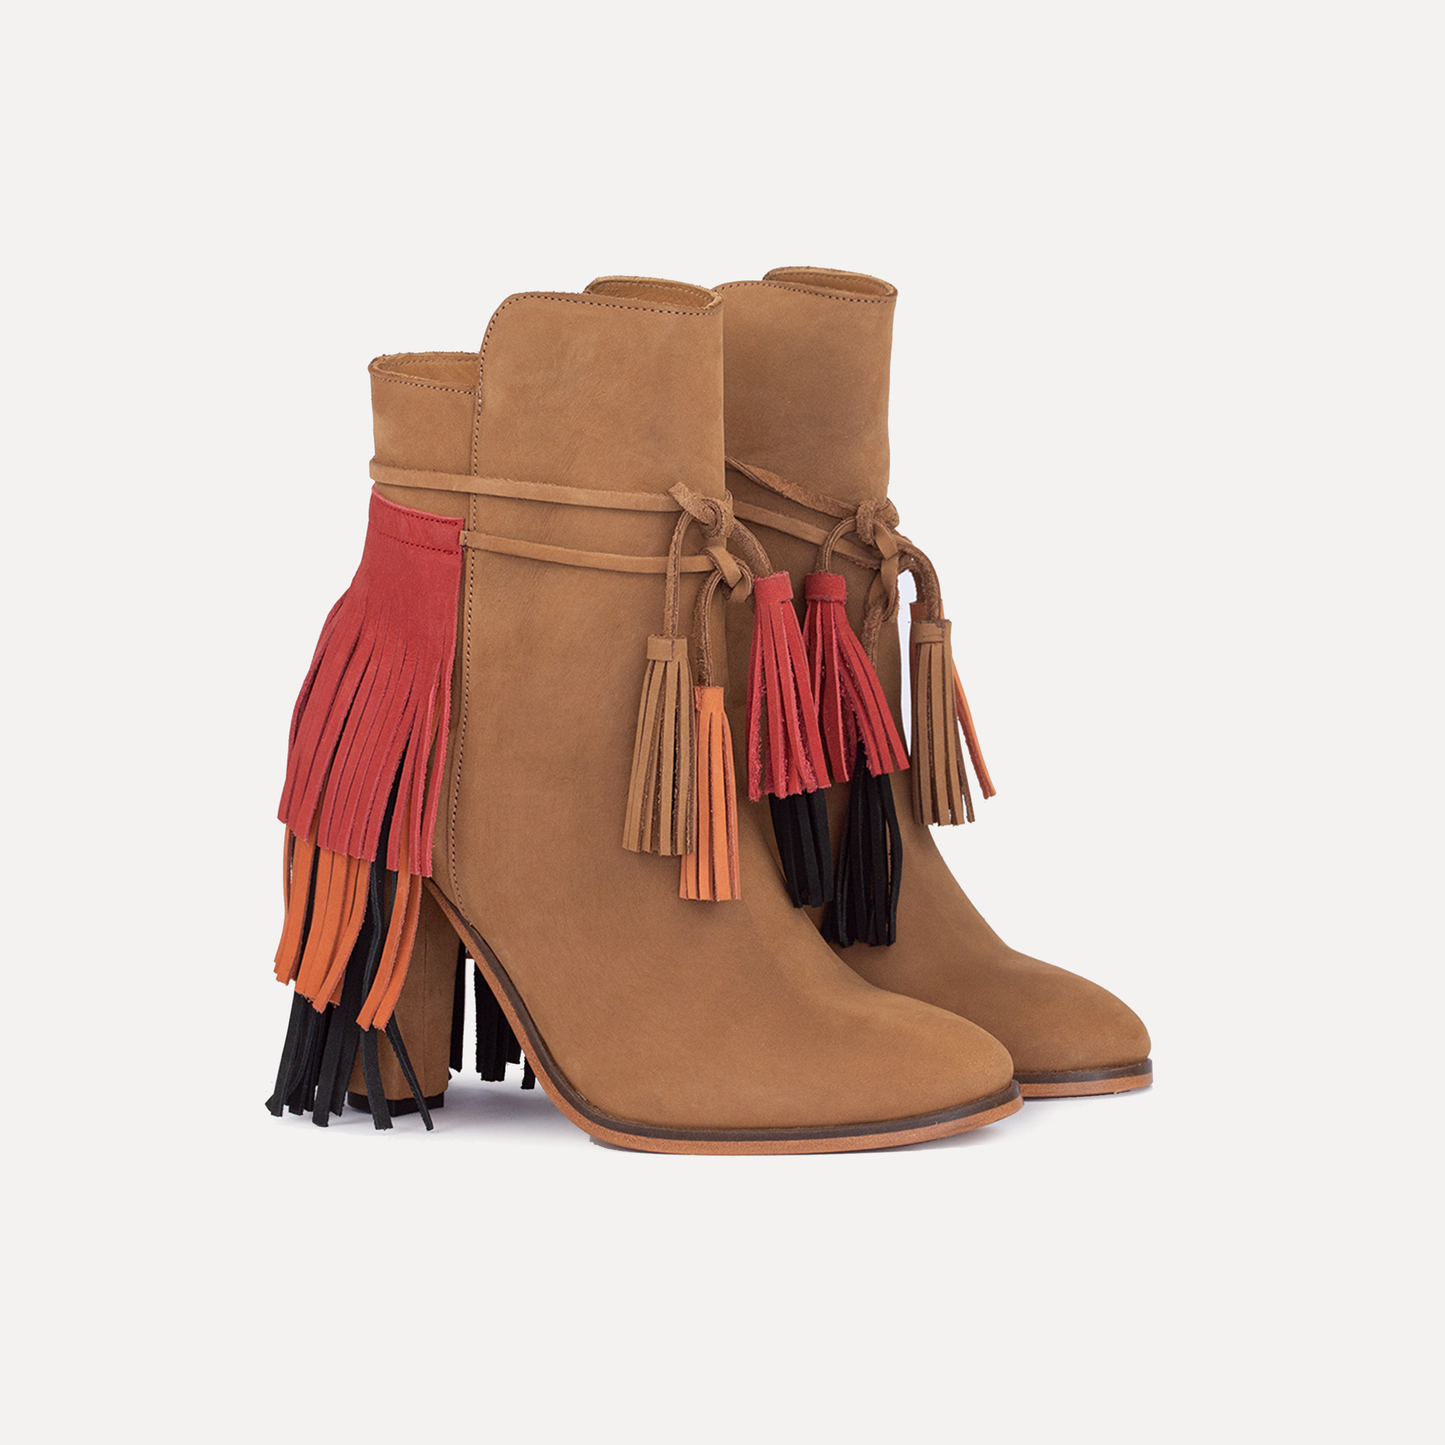 Lazarim - high heel boots with fringes